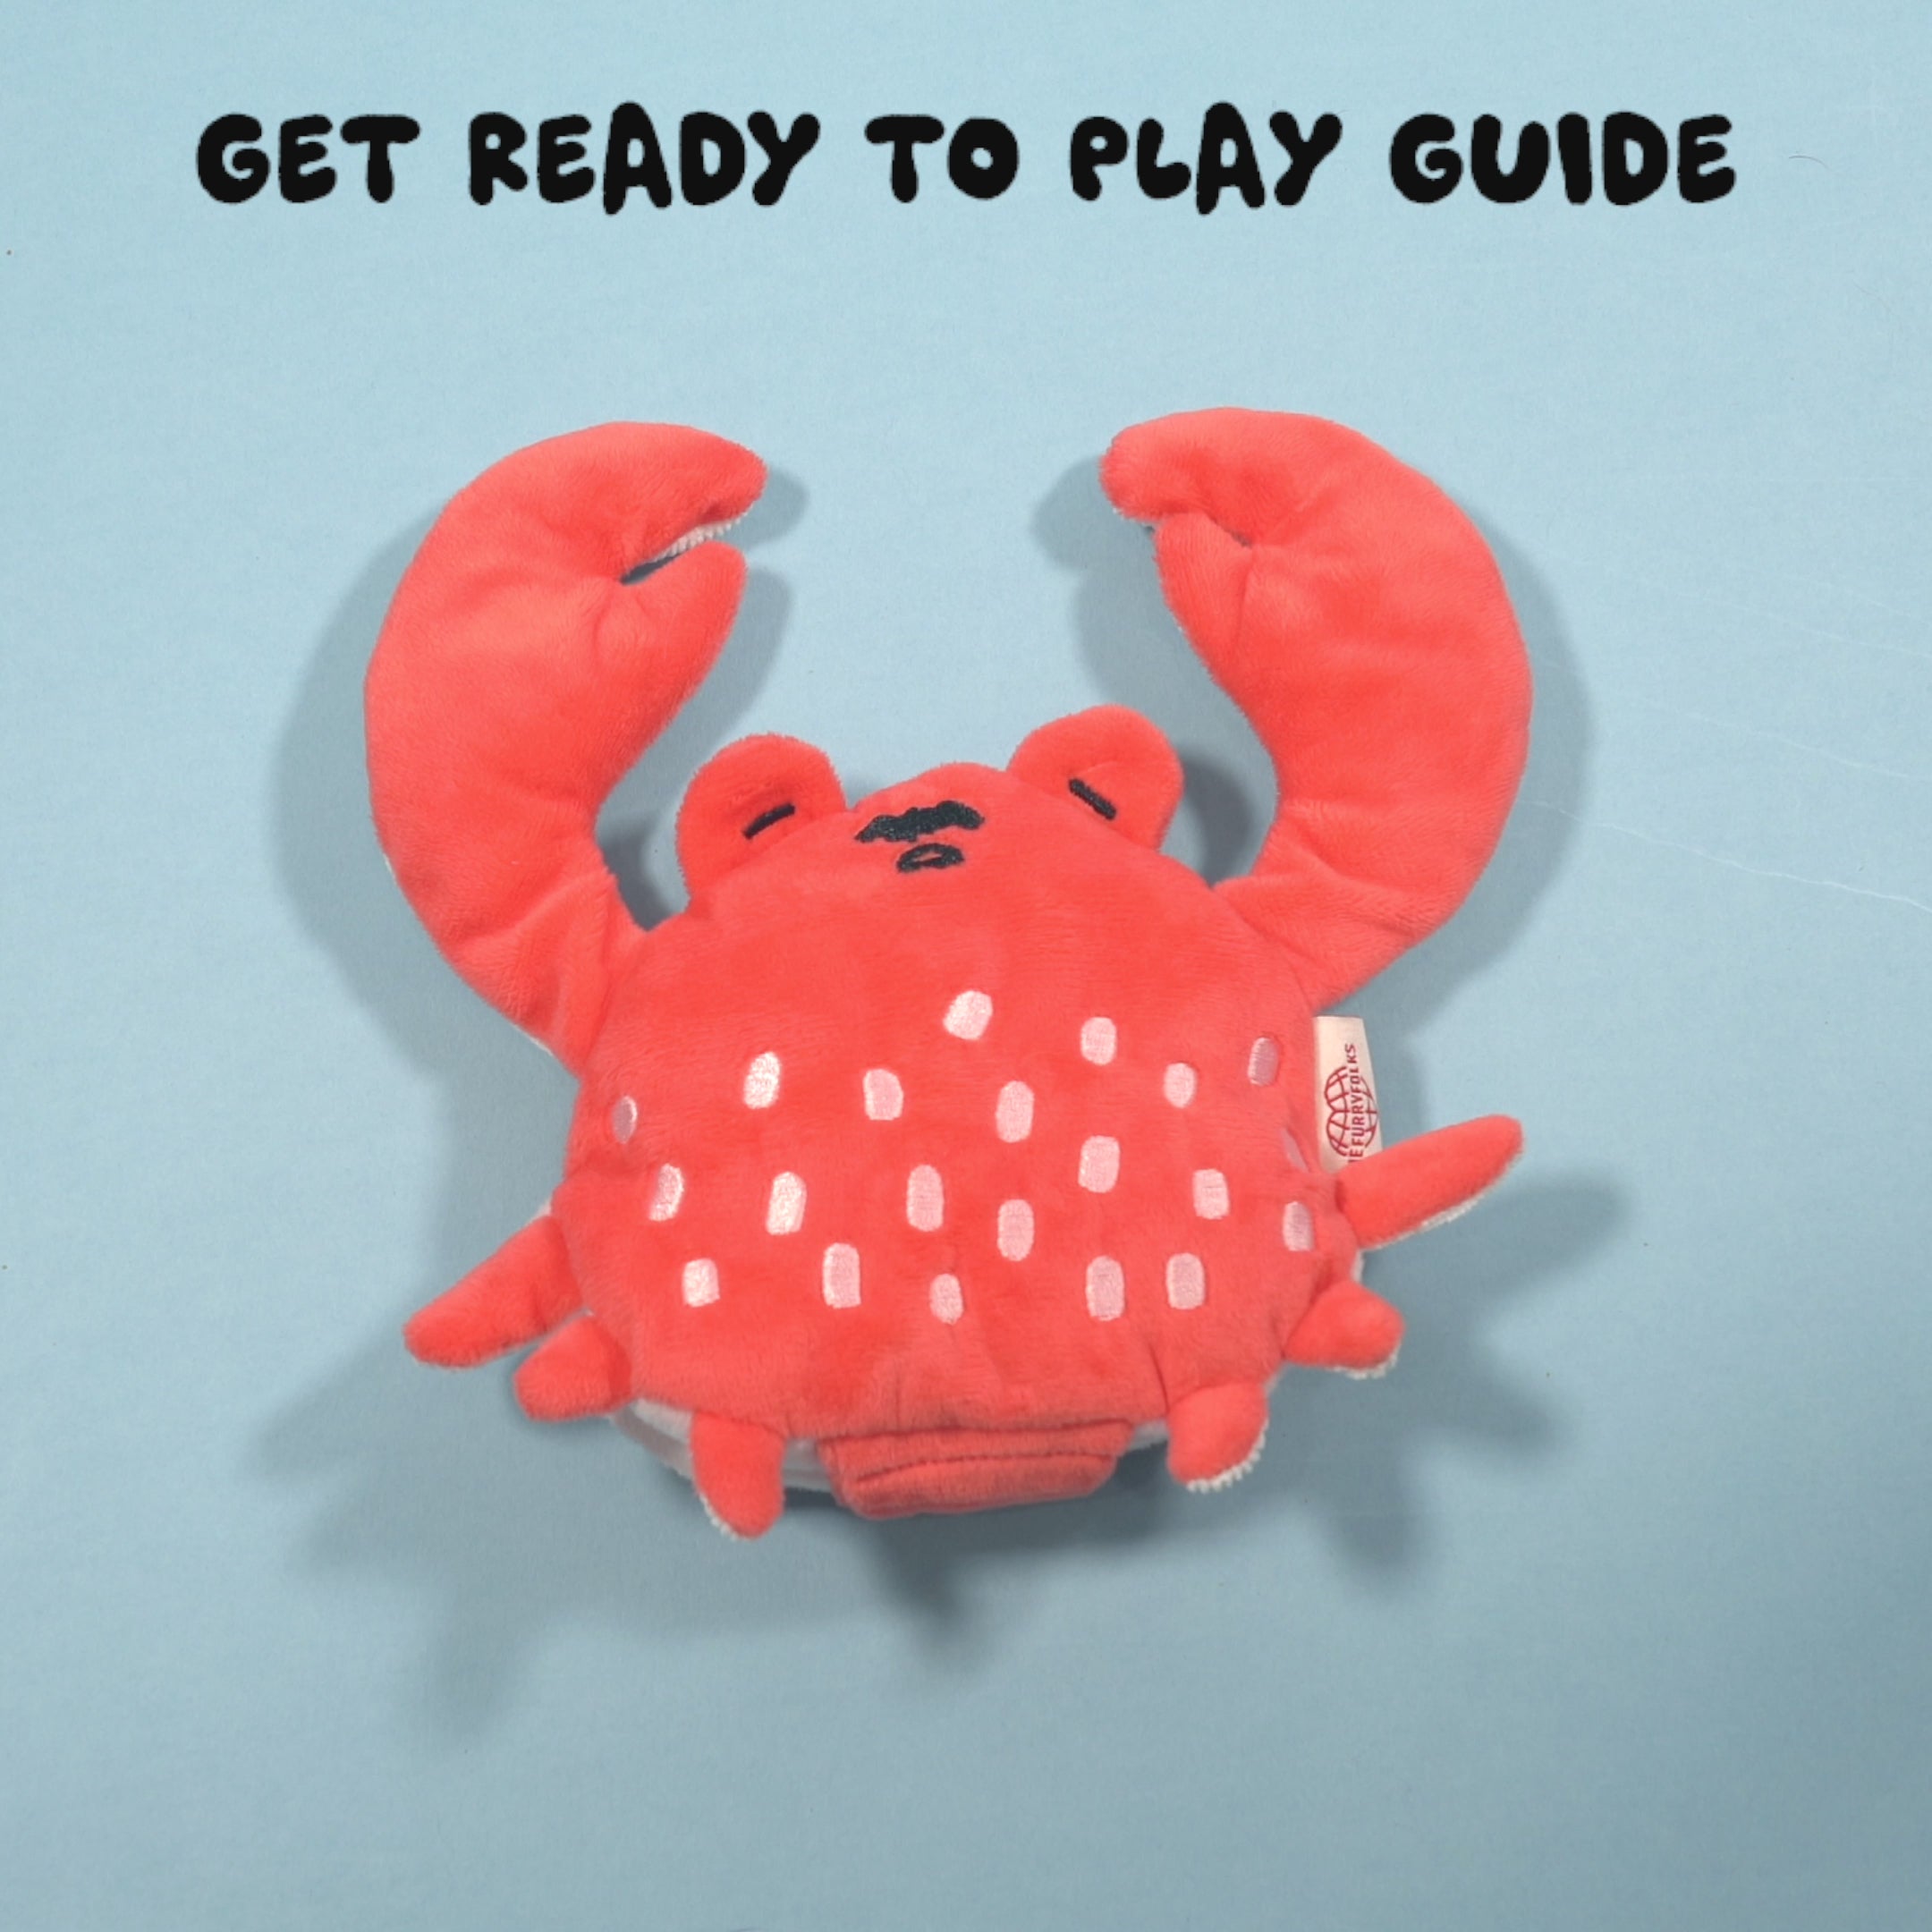 Video about " get ready to play guide"